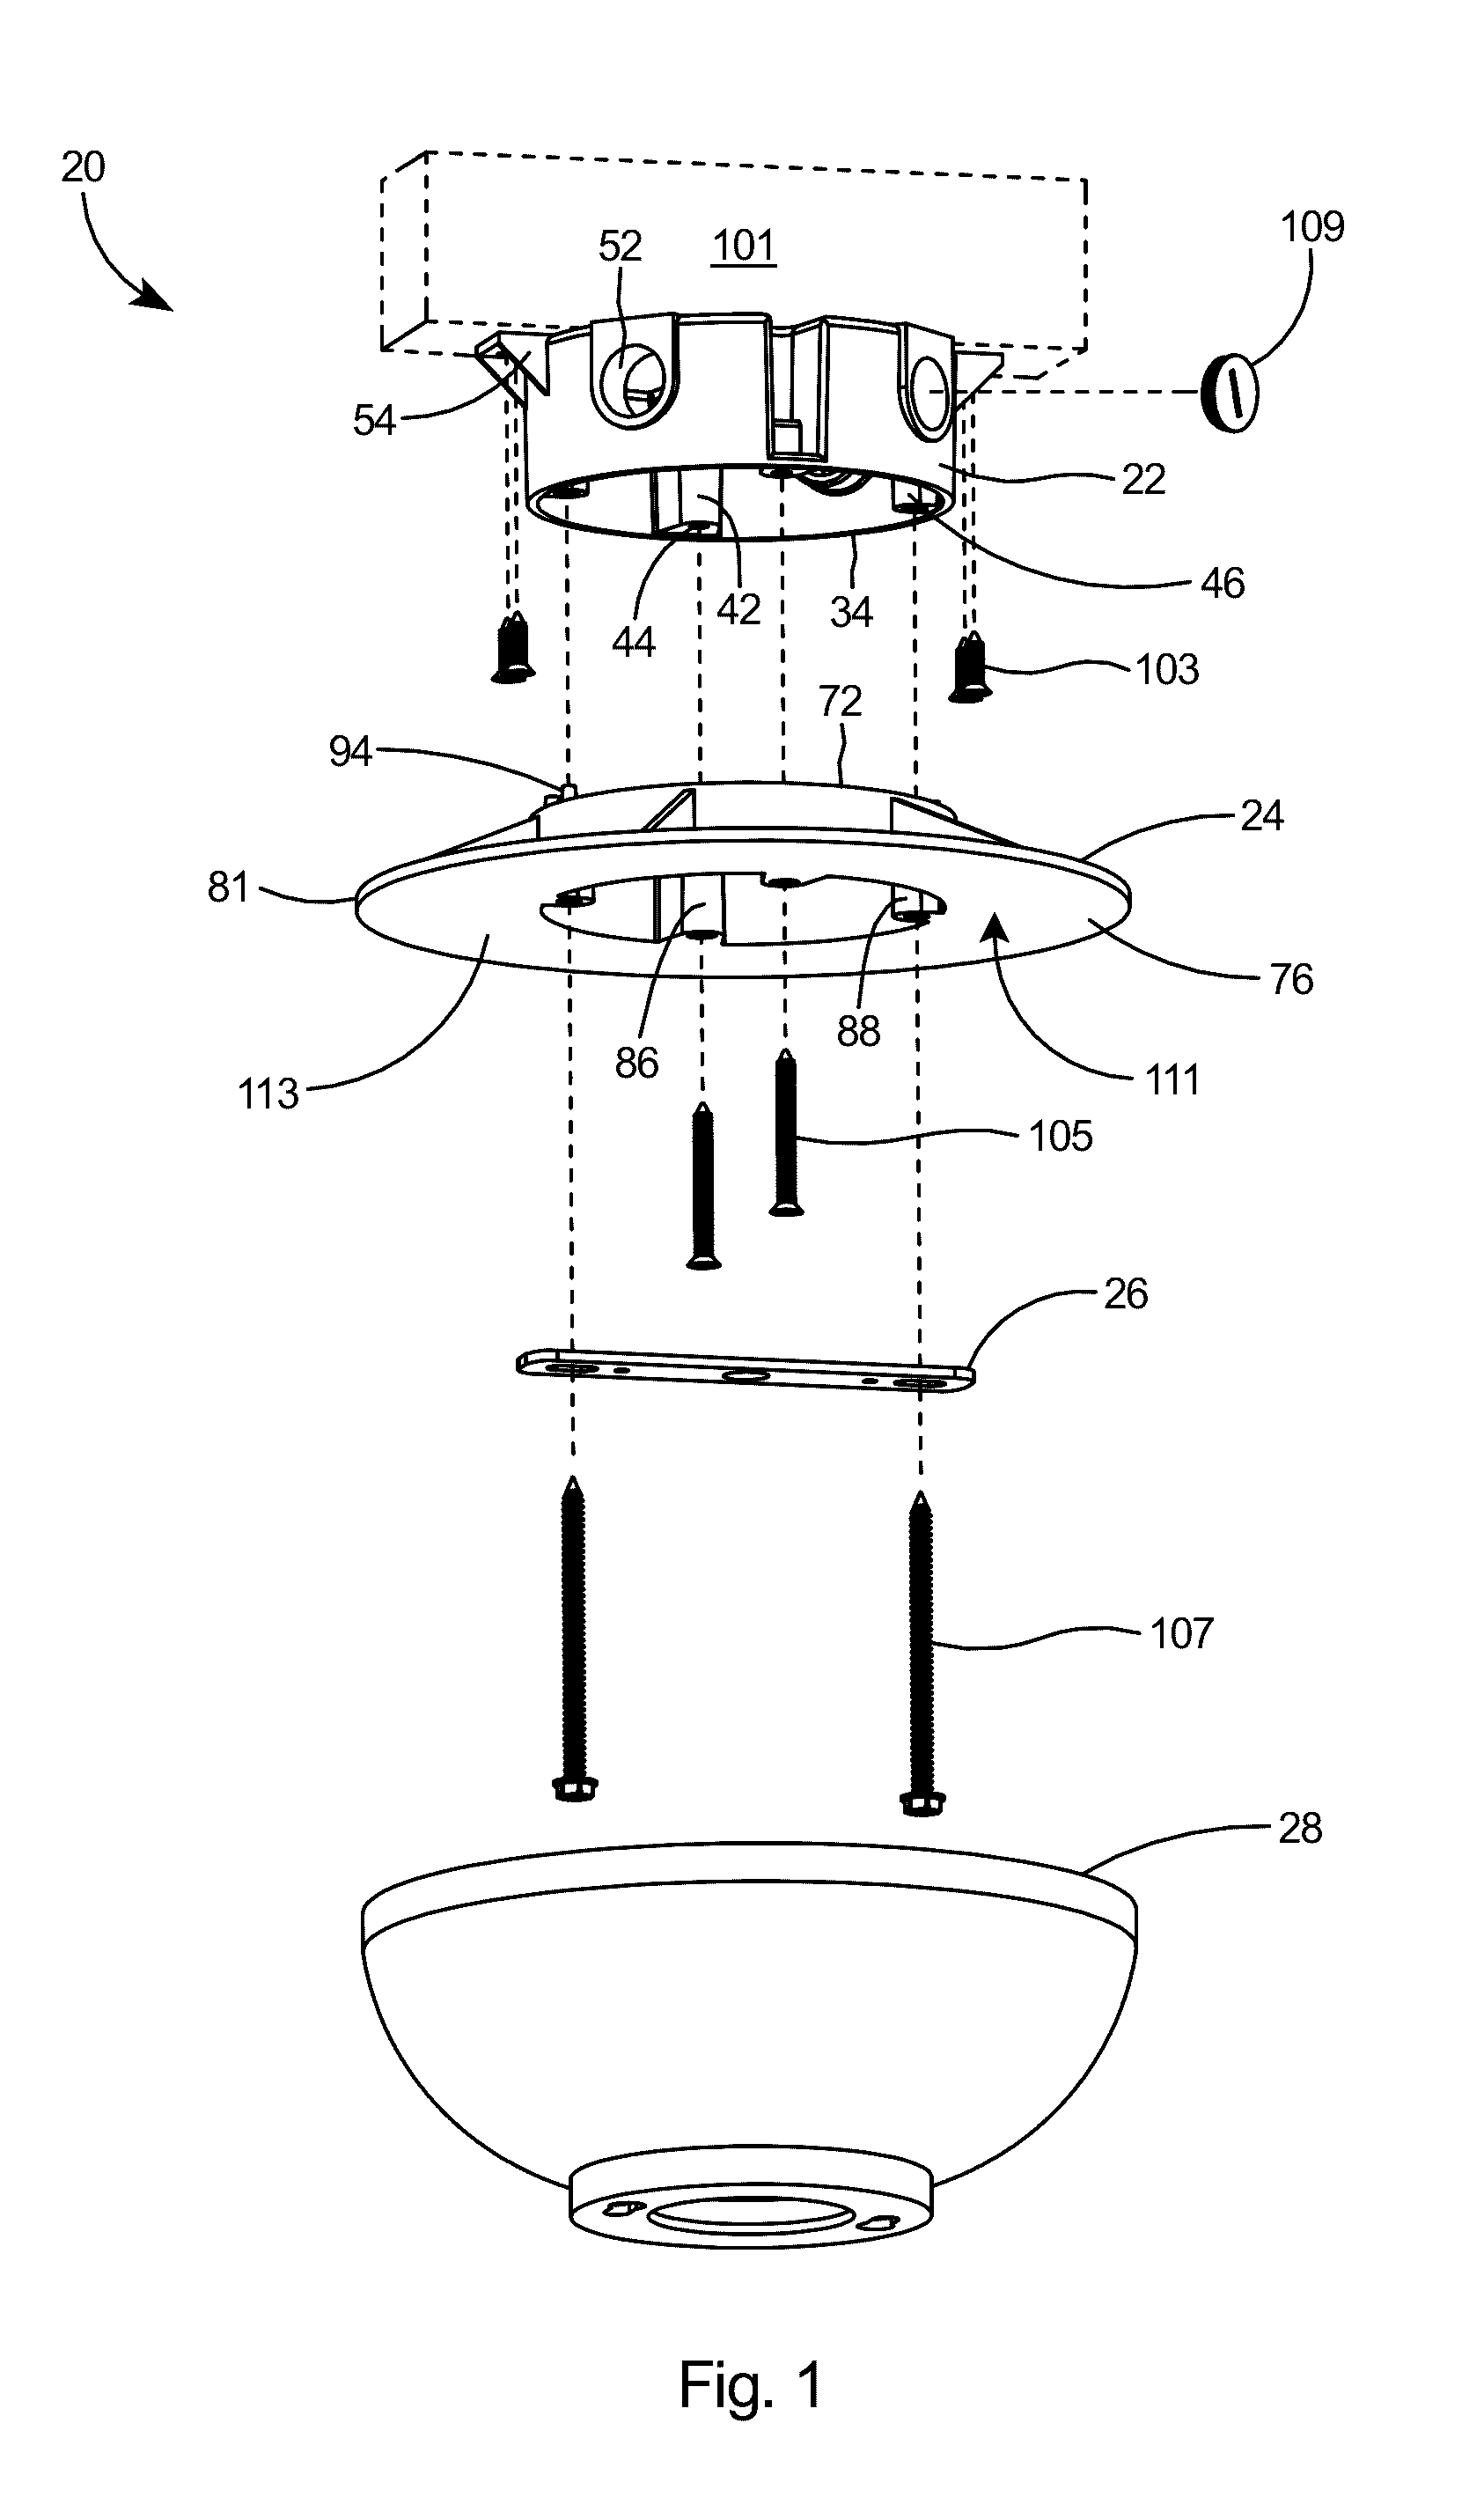 Rain tight electrical box assembly for mounting of an electrical fan or fixture